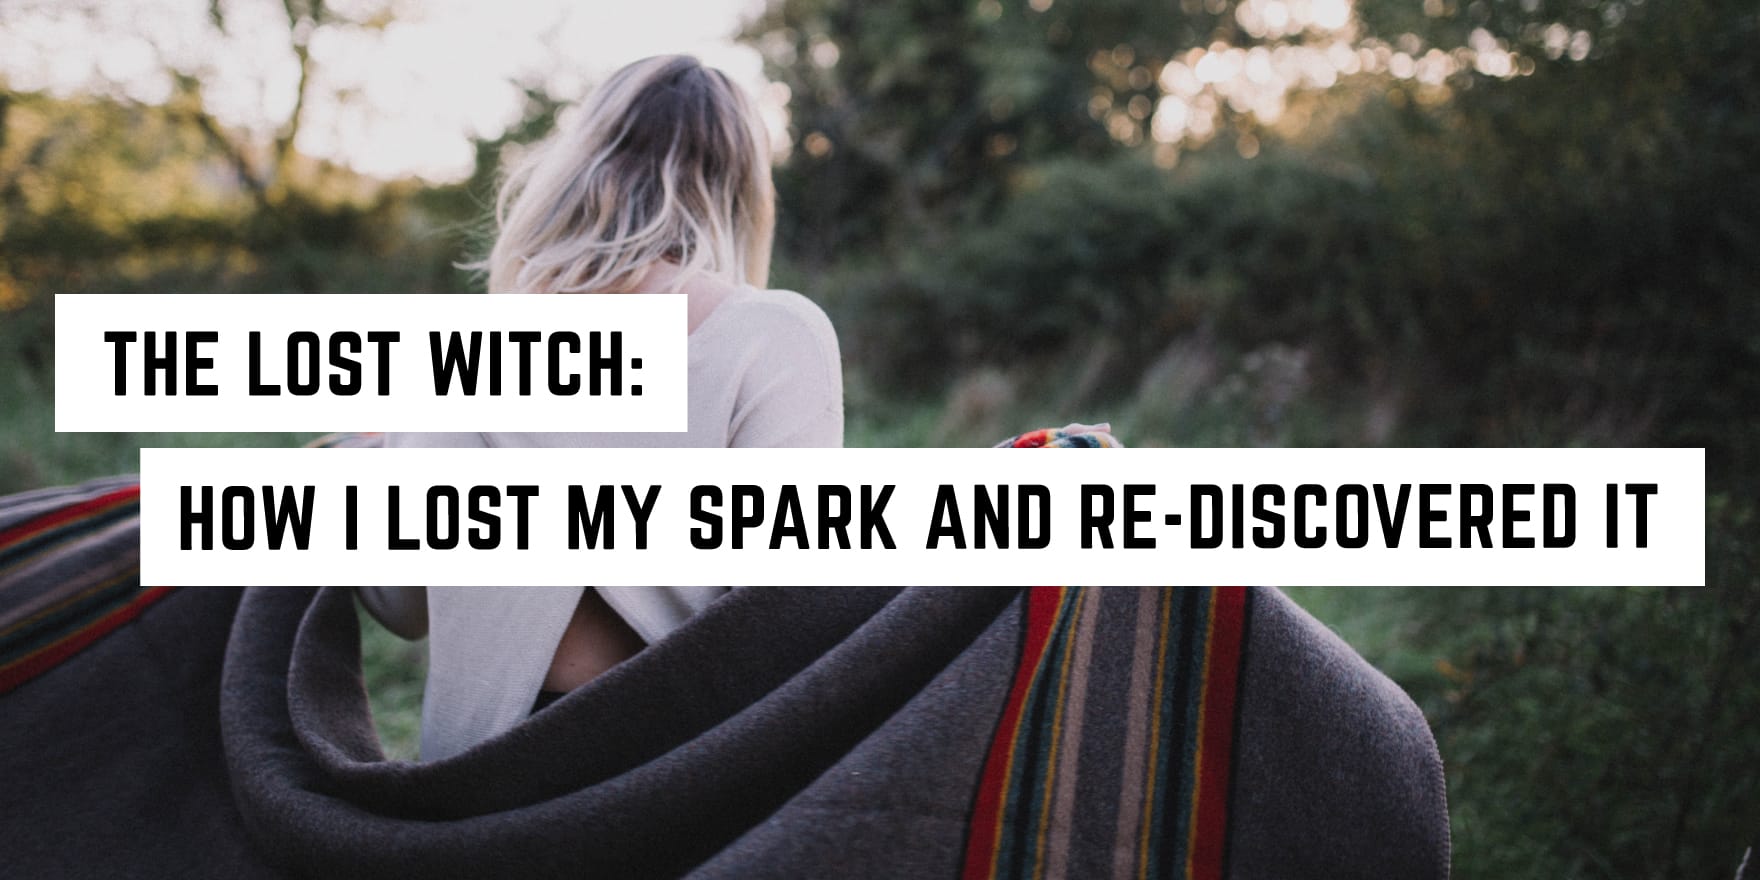 The Lost Witch: How I lost my spark and re-discovered it